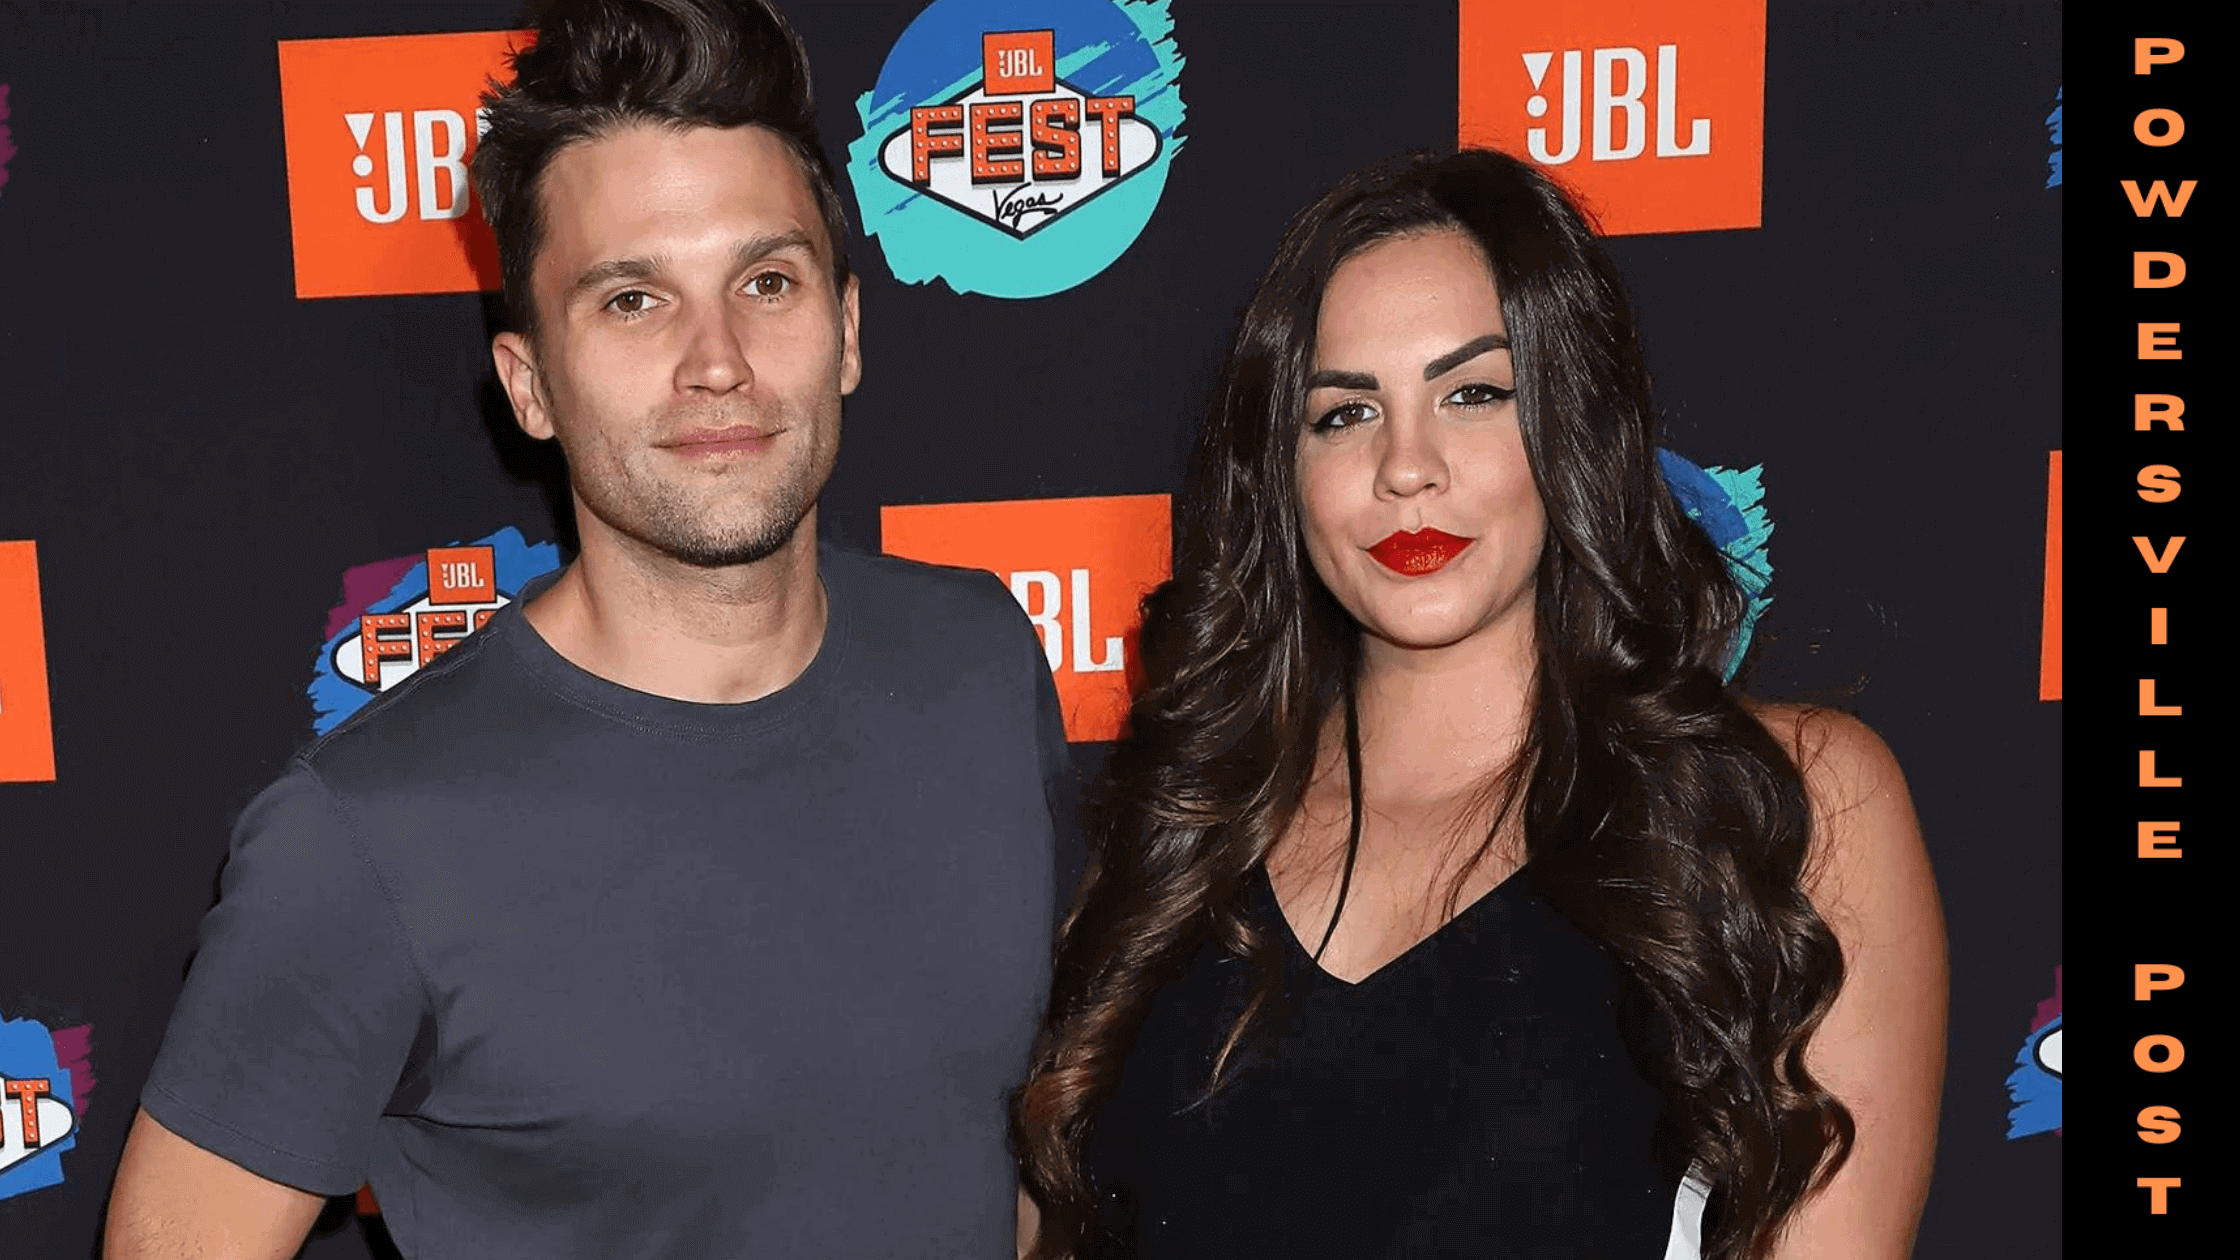 Vanderpump Rules Stars Tom Schwartz And Katie Melony Decided To End Their Relationship